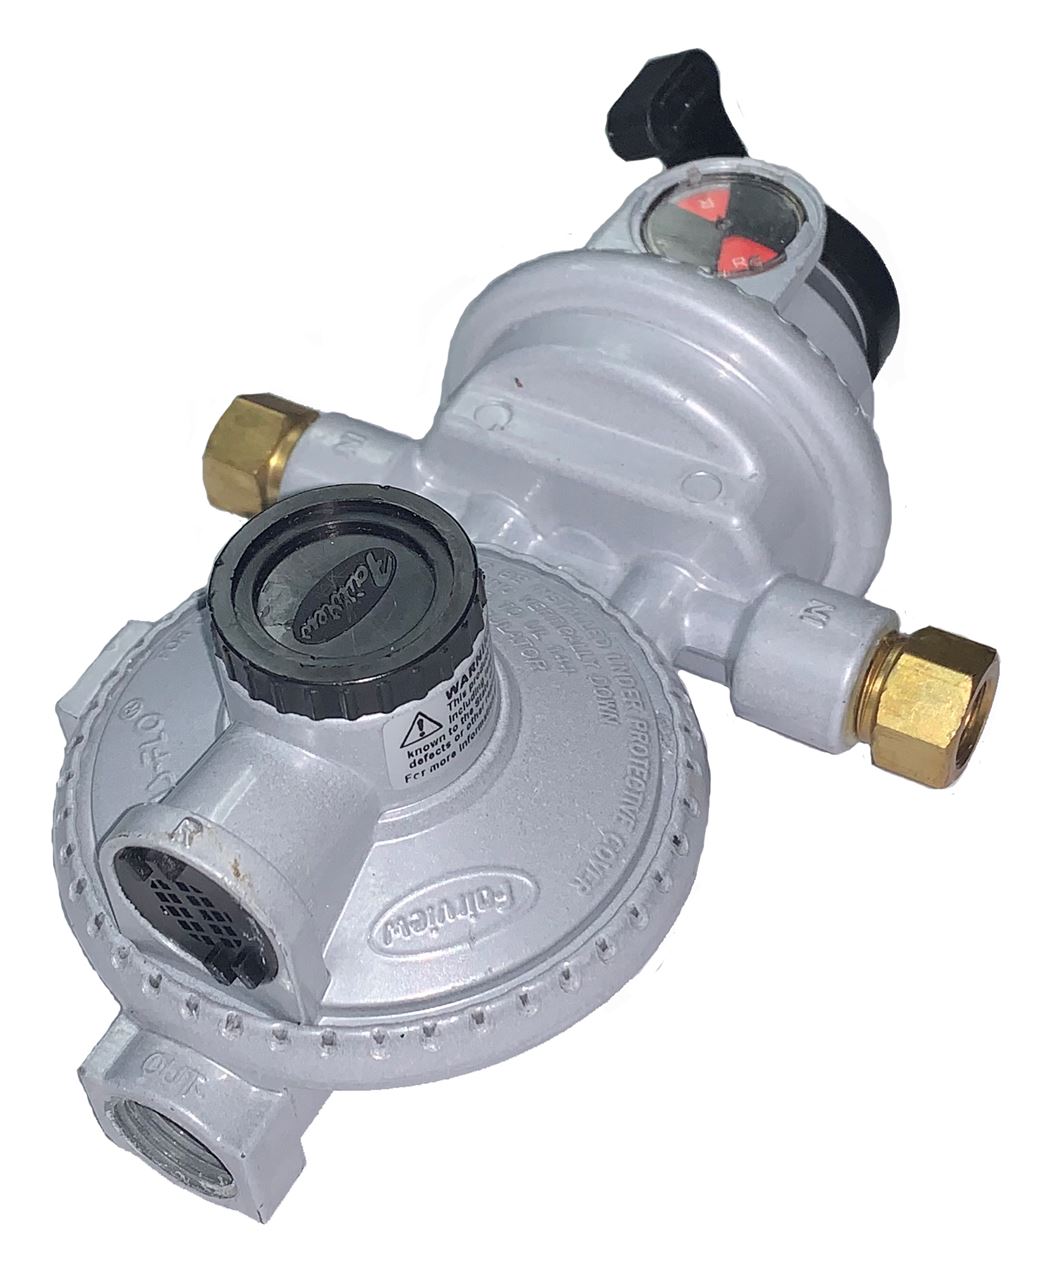 www.PWMall.com. PWMall-GR-9994-Gas-Flo Compact LP-Gas 2 Stage Automatic Gas Flo Gr 630 Propane Regulator